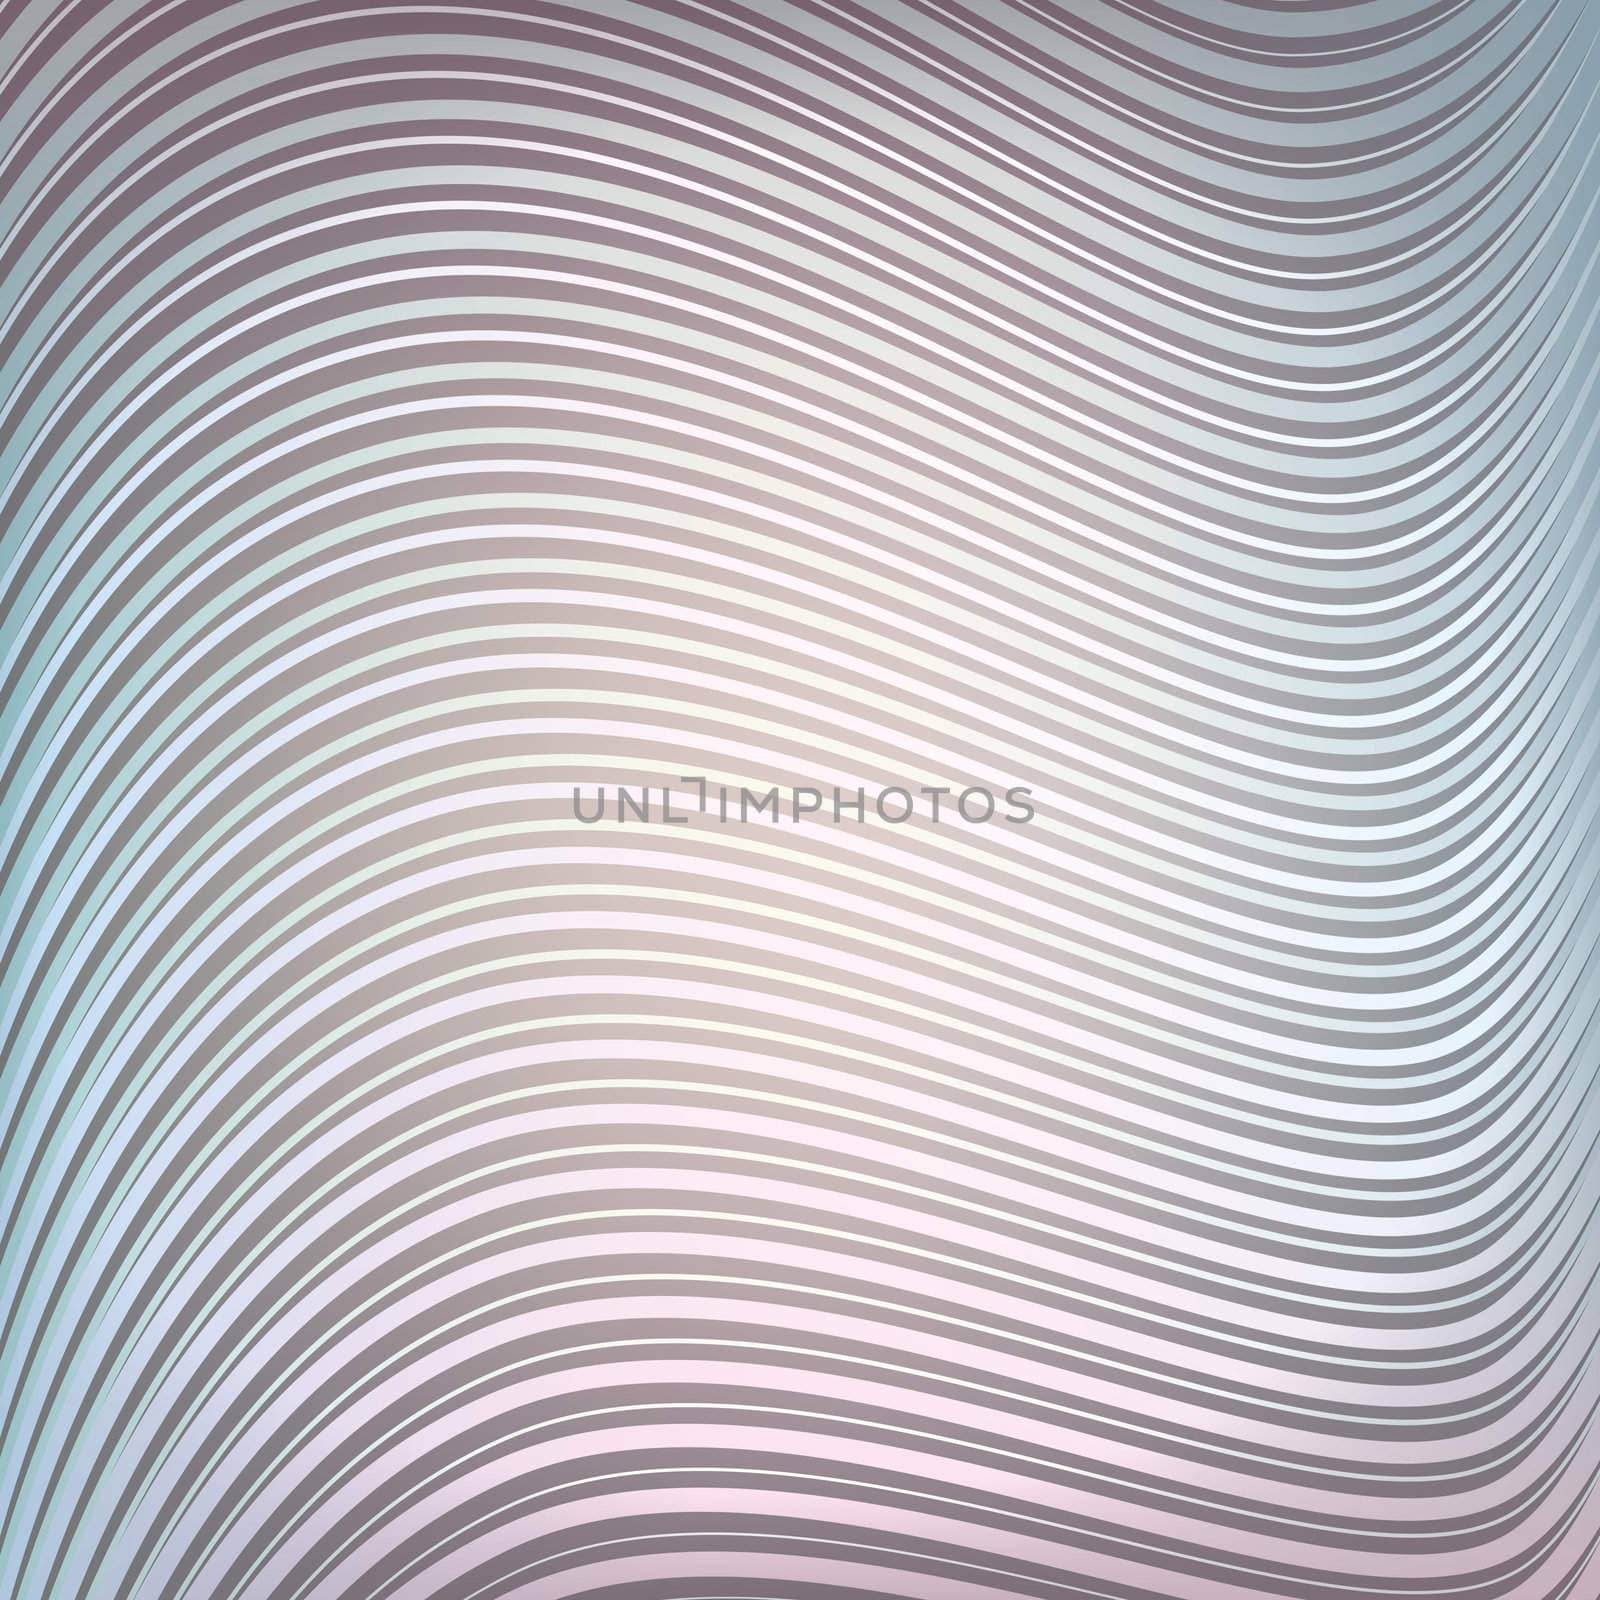 abstract background with grey waves on blue